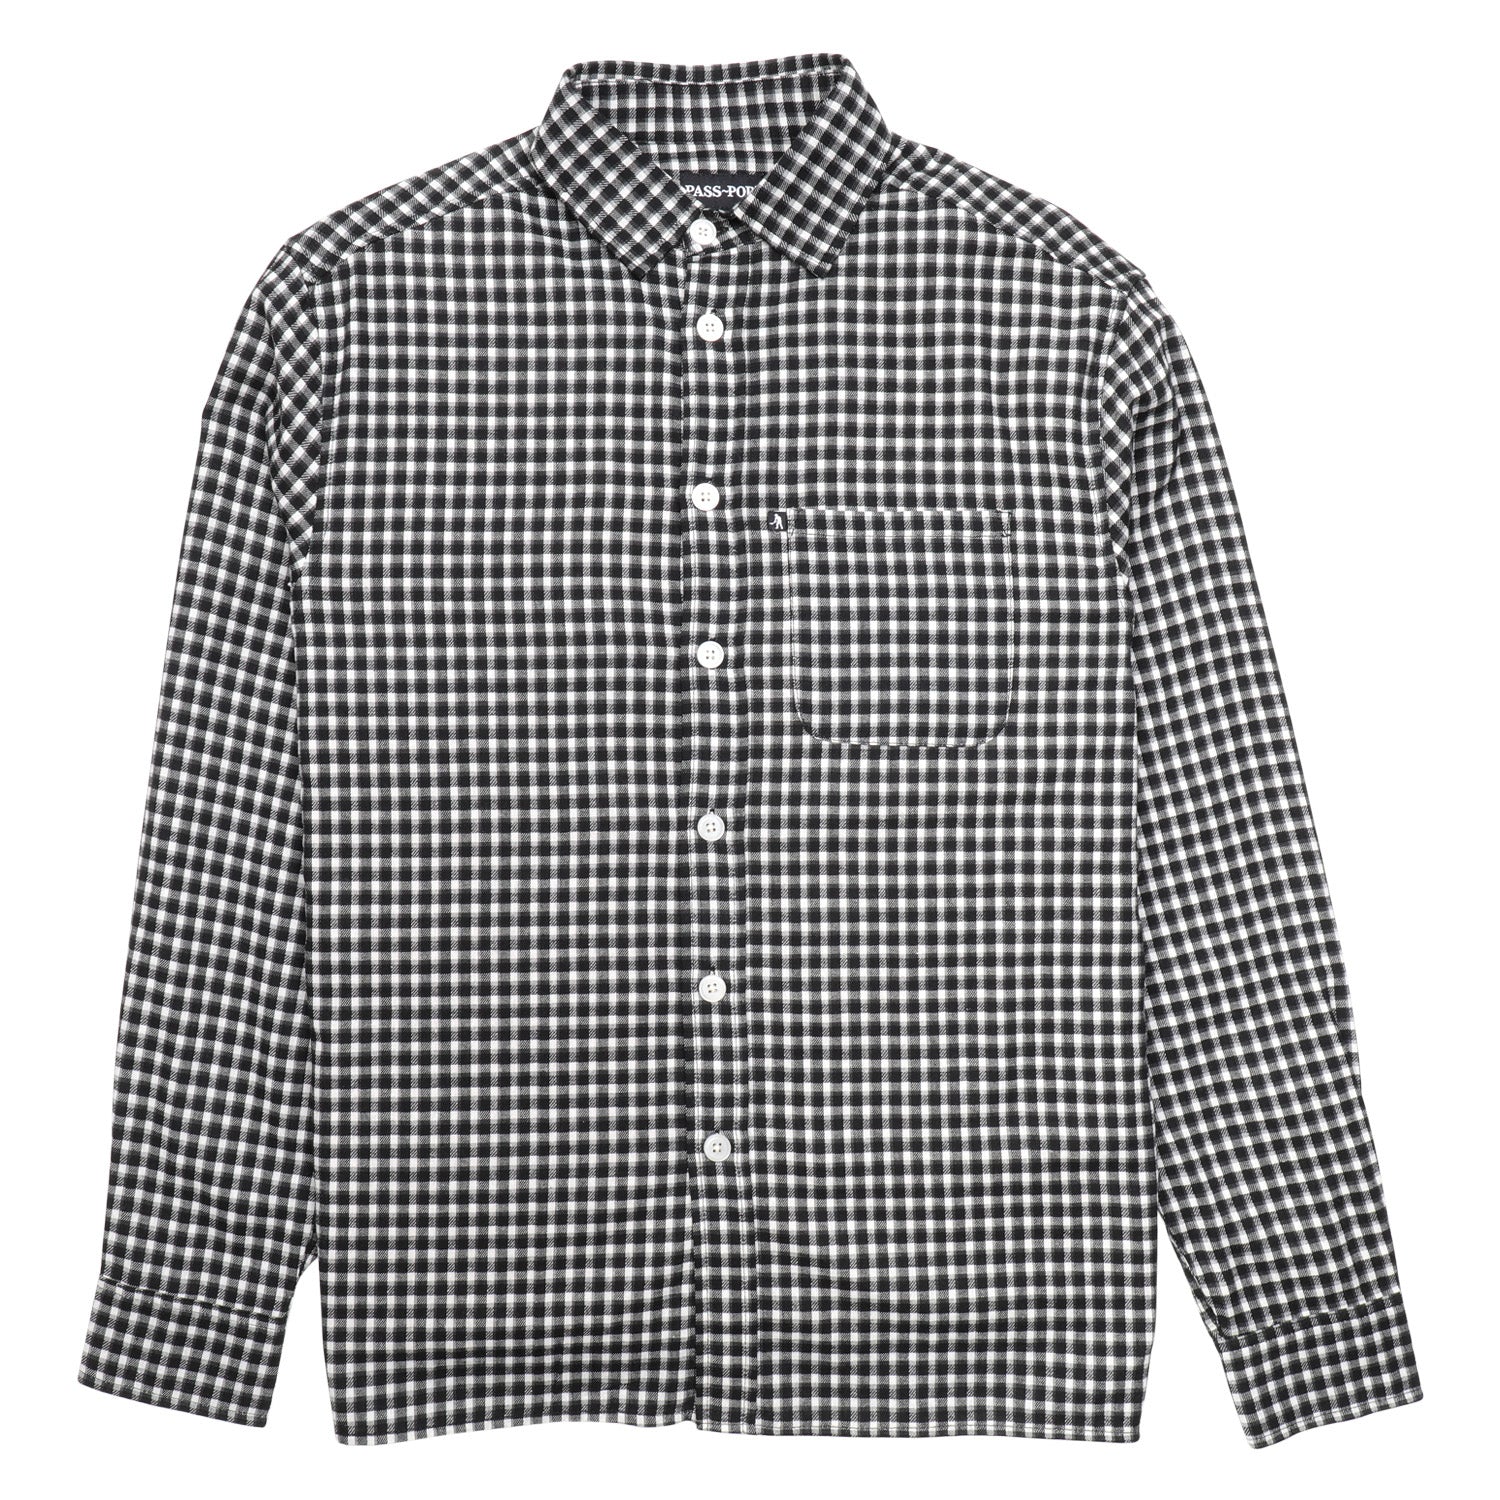 Workers Check LS Shirt, Black